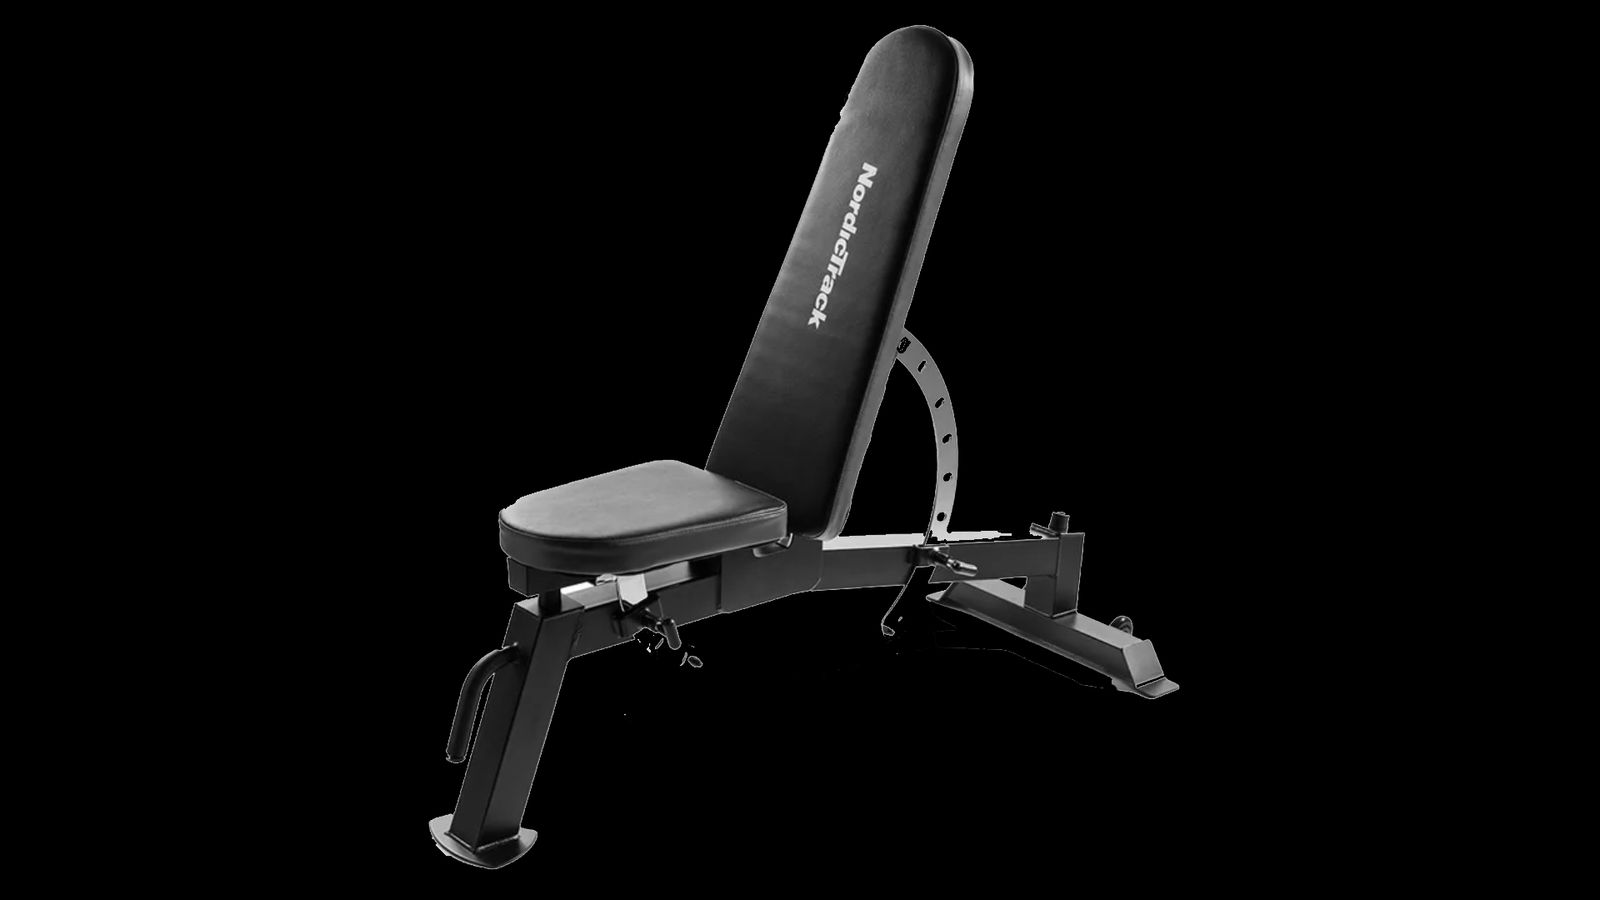 NordicTrack Utility Workout Bench product image of black adjustable bench.